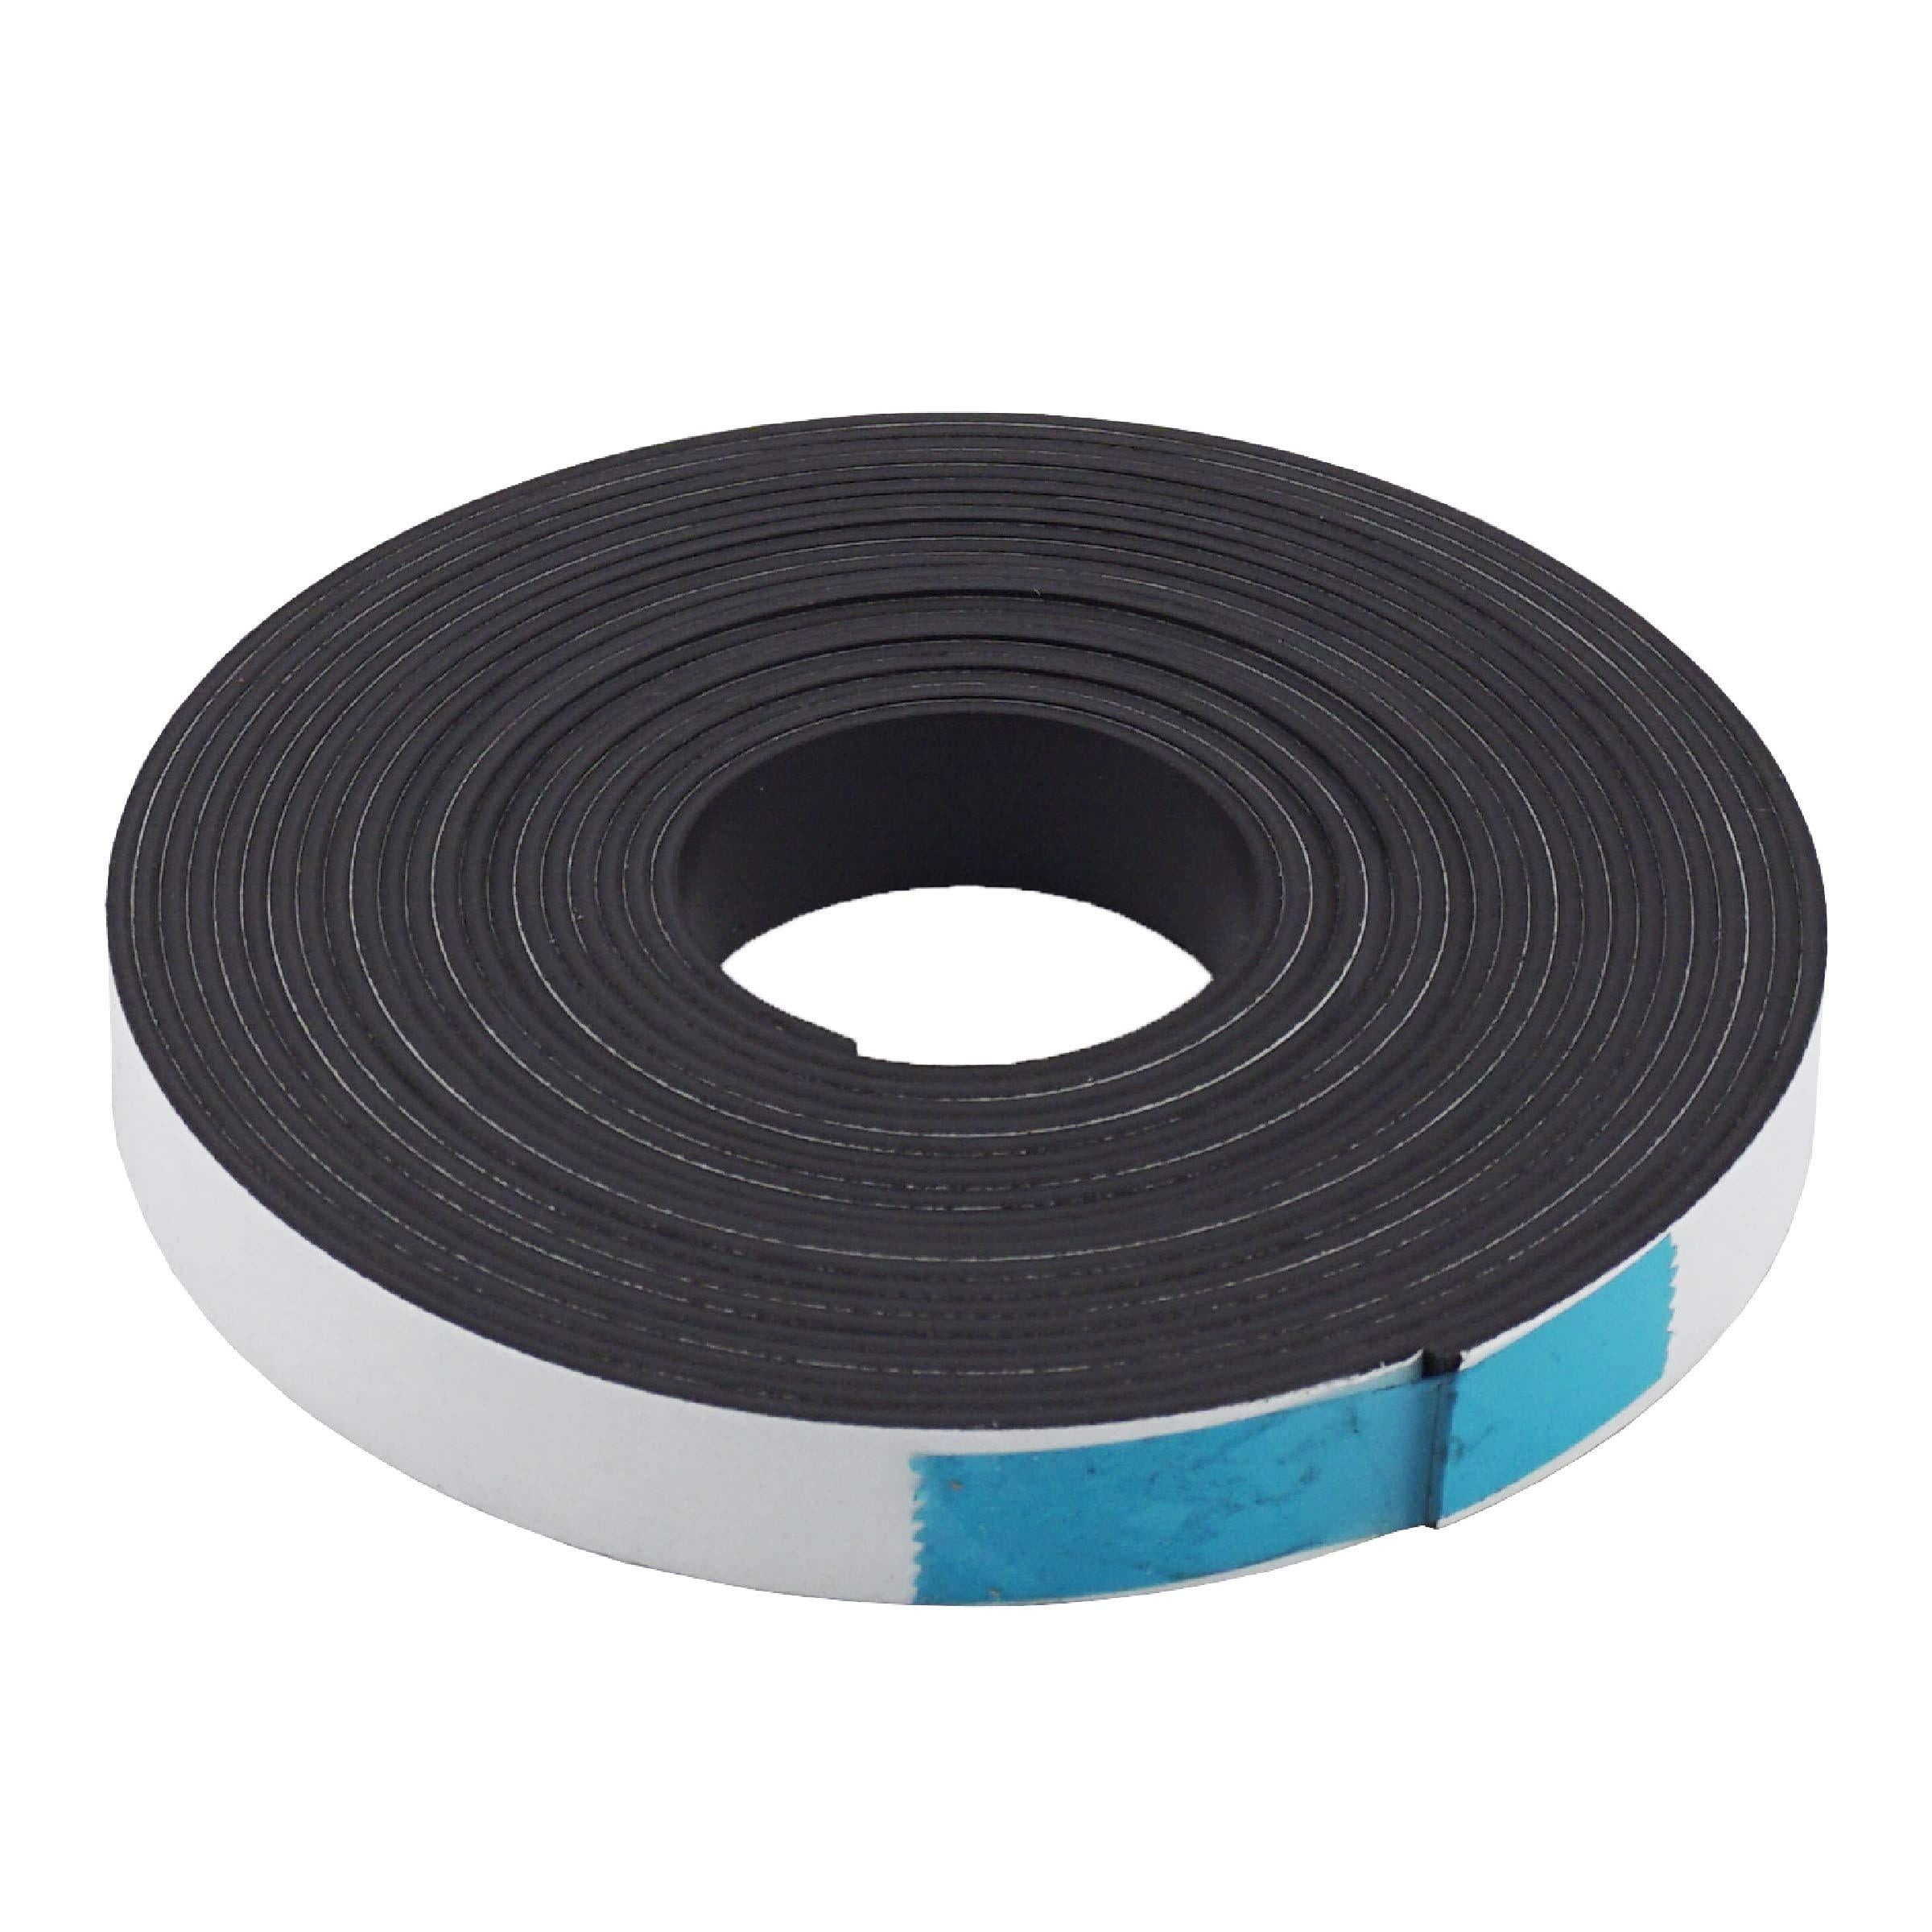 Magnetic Tape Roll - Peel & Stick Backing - ½ x 50' (.30 thickness):  StoreSMART - Filing, Organizing, and Display for Office, School, Warehouse,  and Home